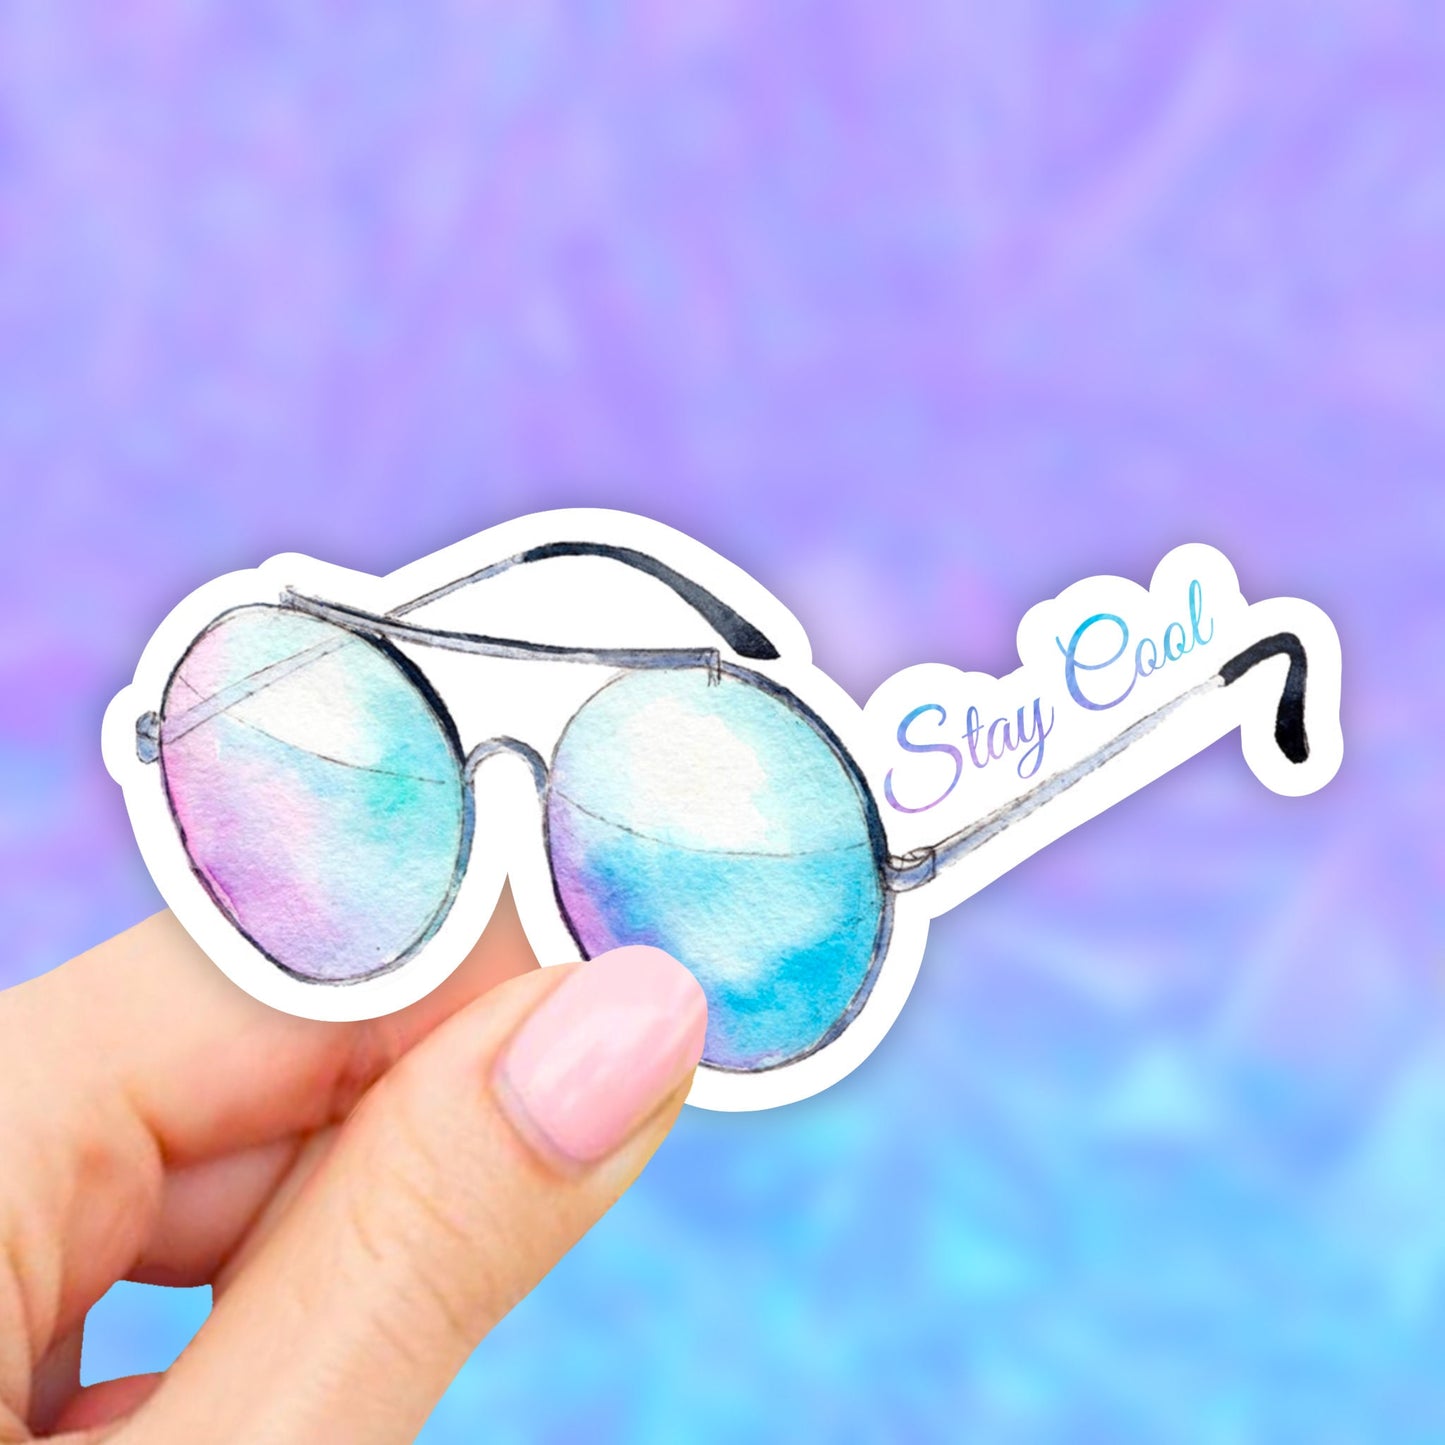 Stay cool glasses sticker, sunglasses sticker, laptop stickers, waterbottle stickers, tumbler decal, computer stickers, watercolor stickers